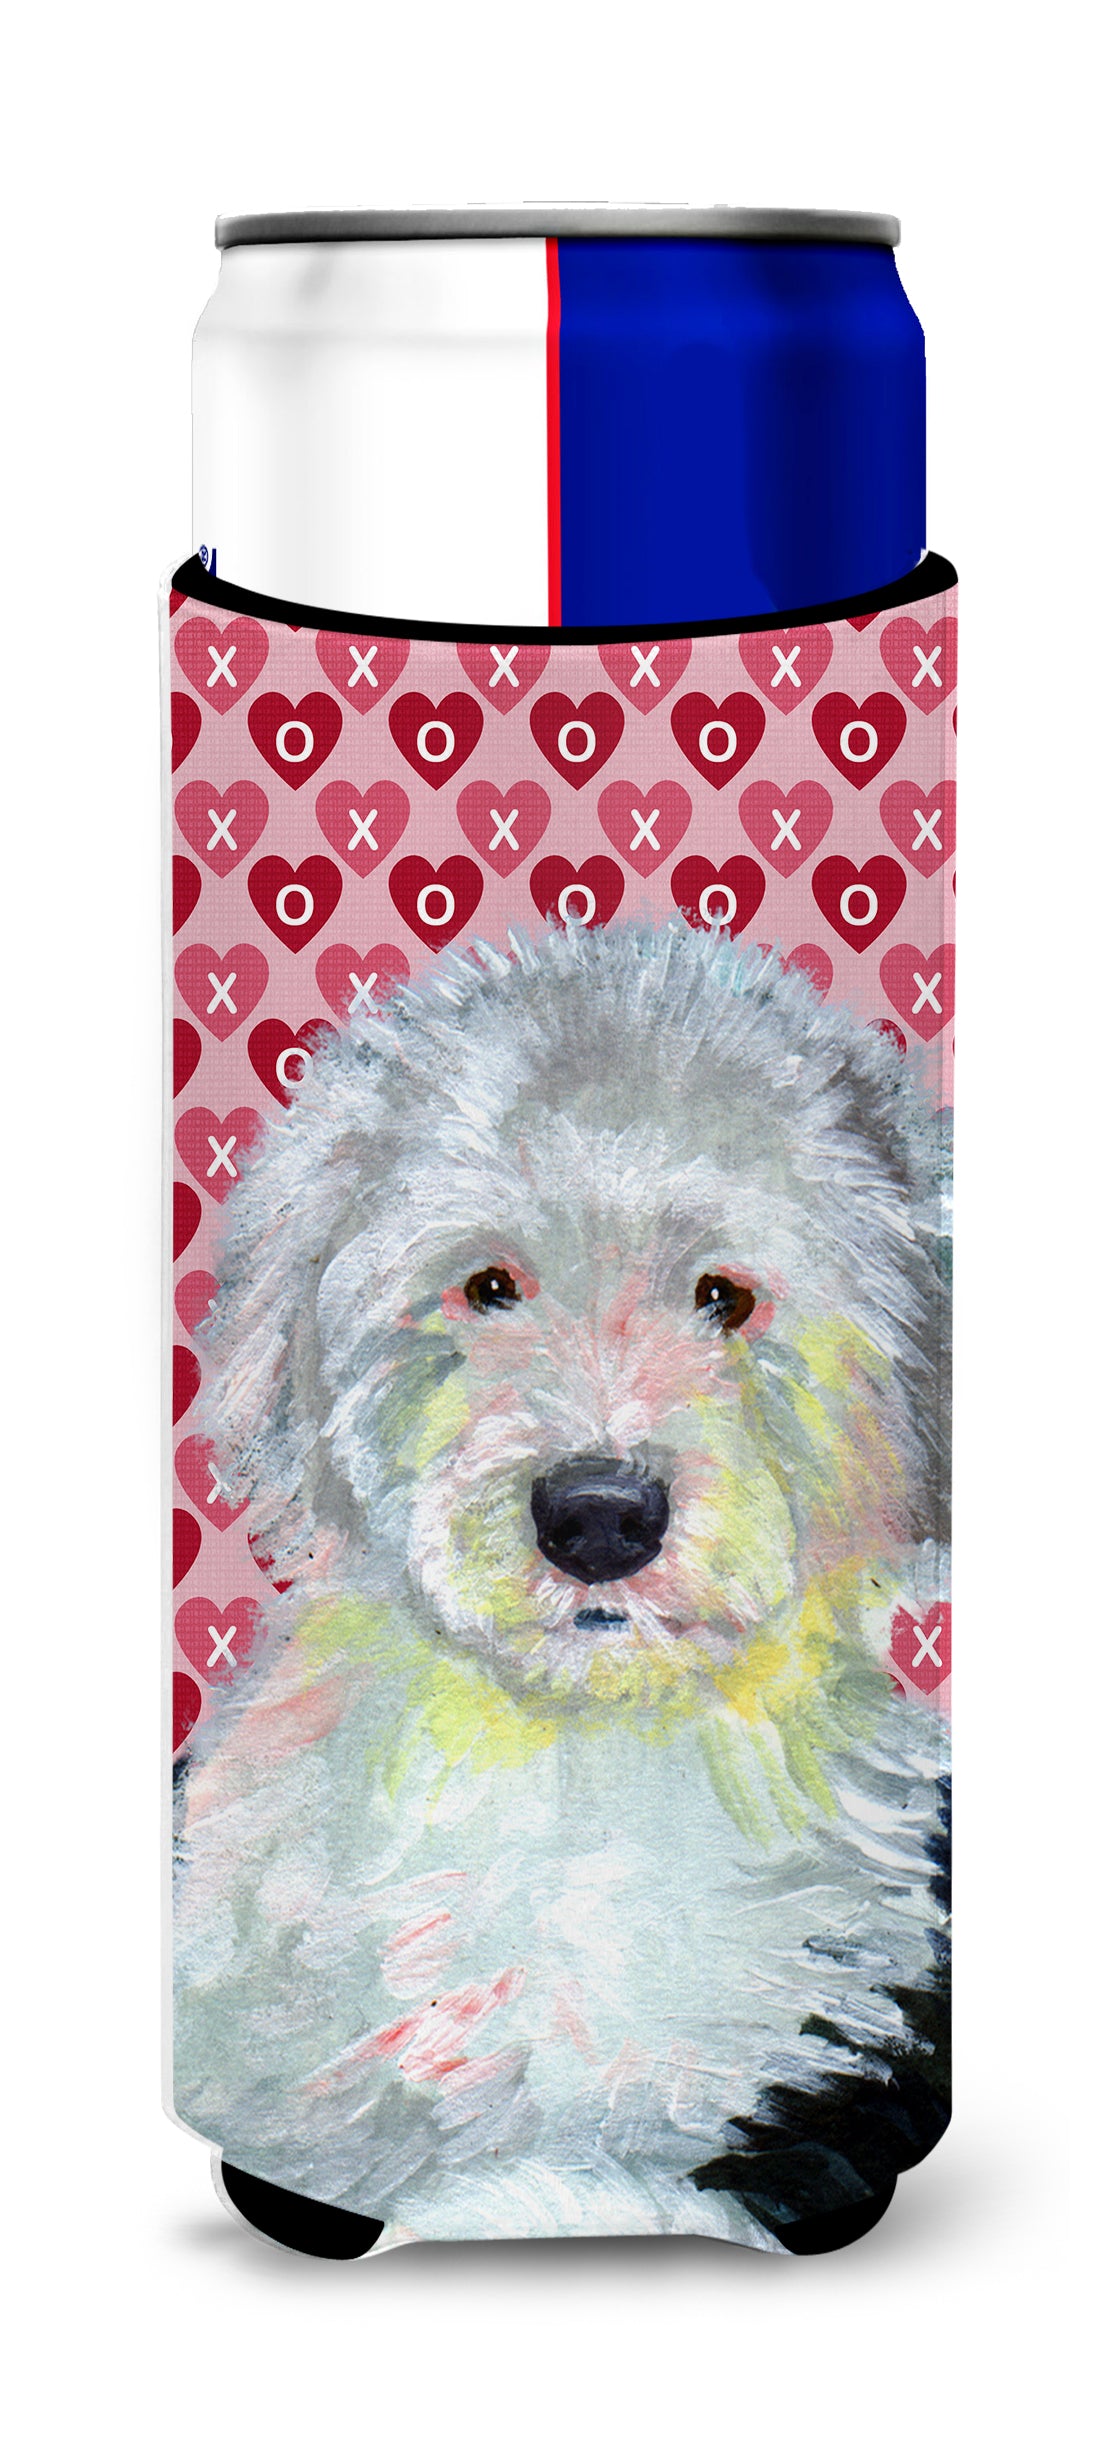 Old English Sheepdog Hearts Love and Valentine's Day Portrait Ultra Beverage Insulators for slim cans LH9171MUK